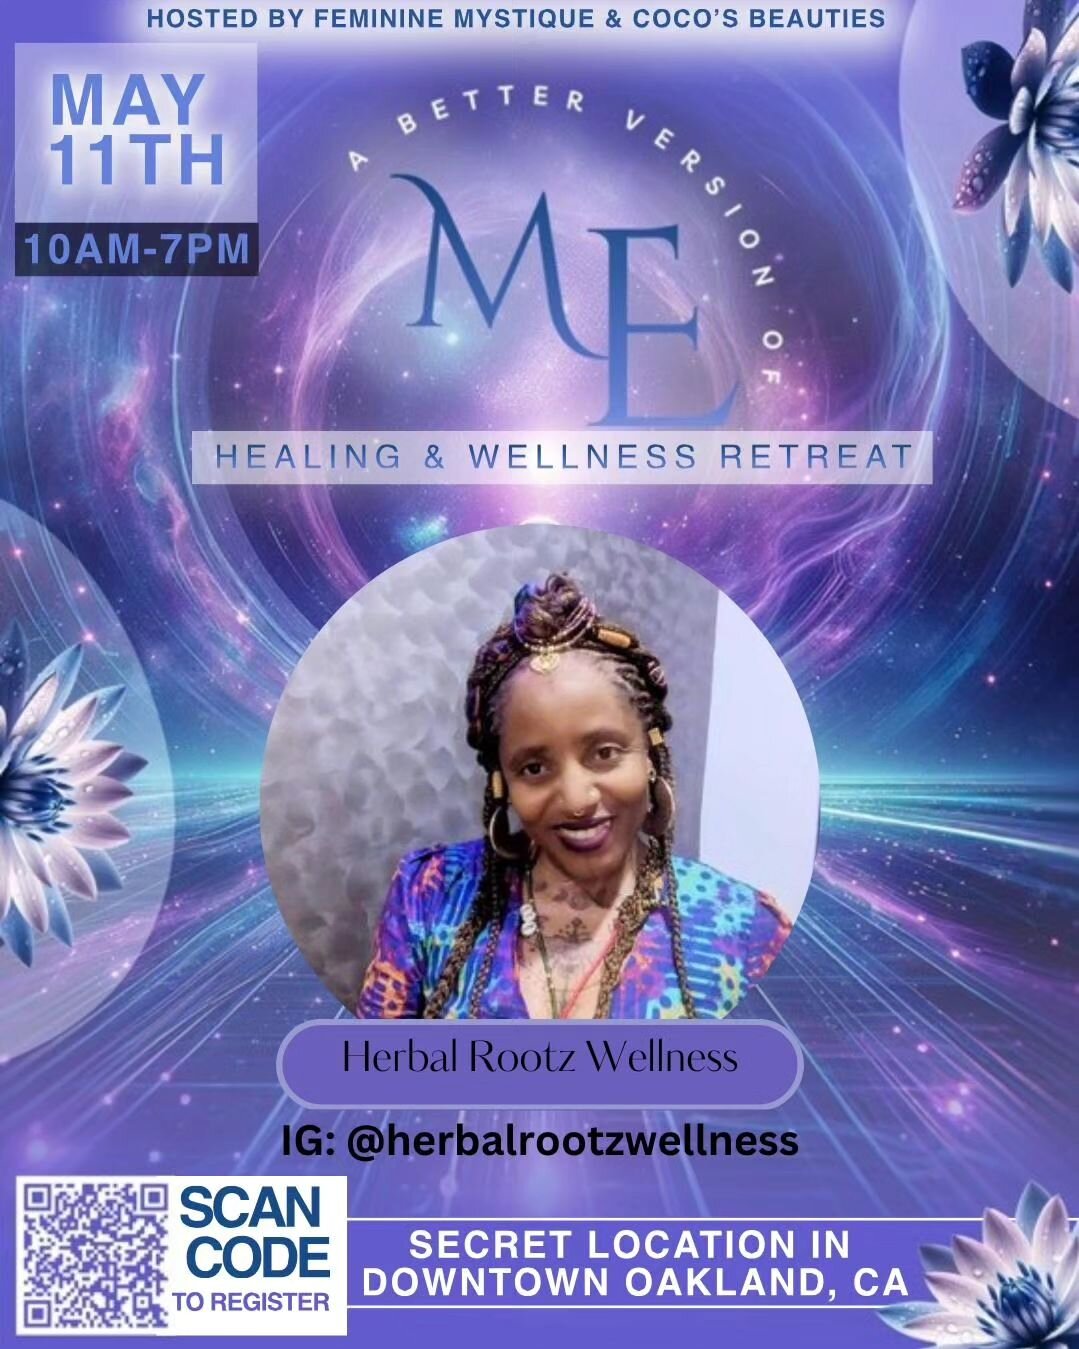 Herbal Rootz Wellness will be vending at this beautiful event. Super excited😆

❤️​ Step into the realm of Feminine Mystique Wellness and Coco&rsquo;s Beauties &lsquo;Better Version of Me&rsquo; Wellness Retreat

🧘🏾&zwj;♀️May 11th from 10 AM to 7 P